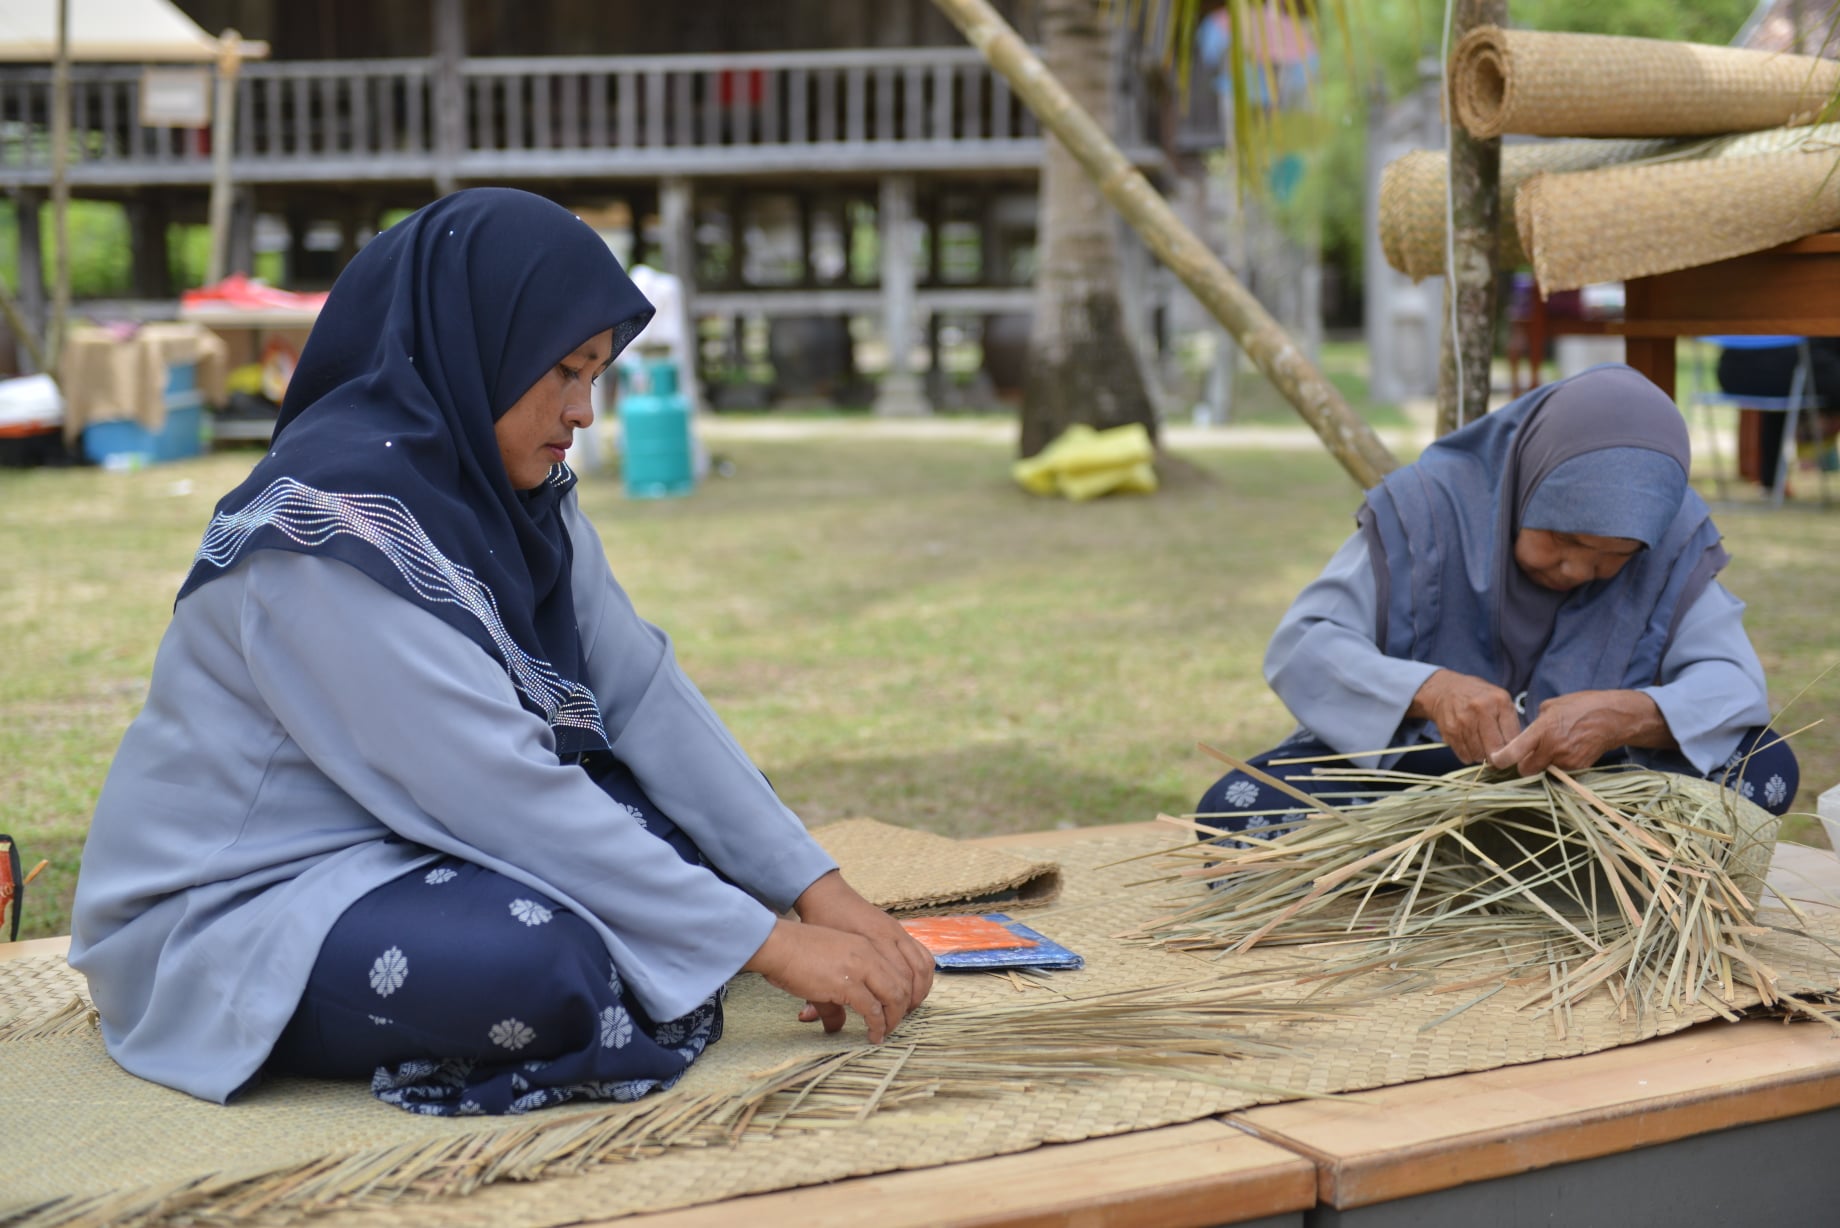 The restoration projects have revived interest in keeping Terangganu crafts alive - from weavers to woodworking craftsmen - by bringing them to a new generation of travellers. Photo courtesy of Terrapuri Heritage Village